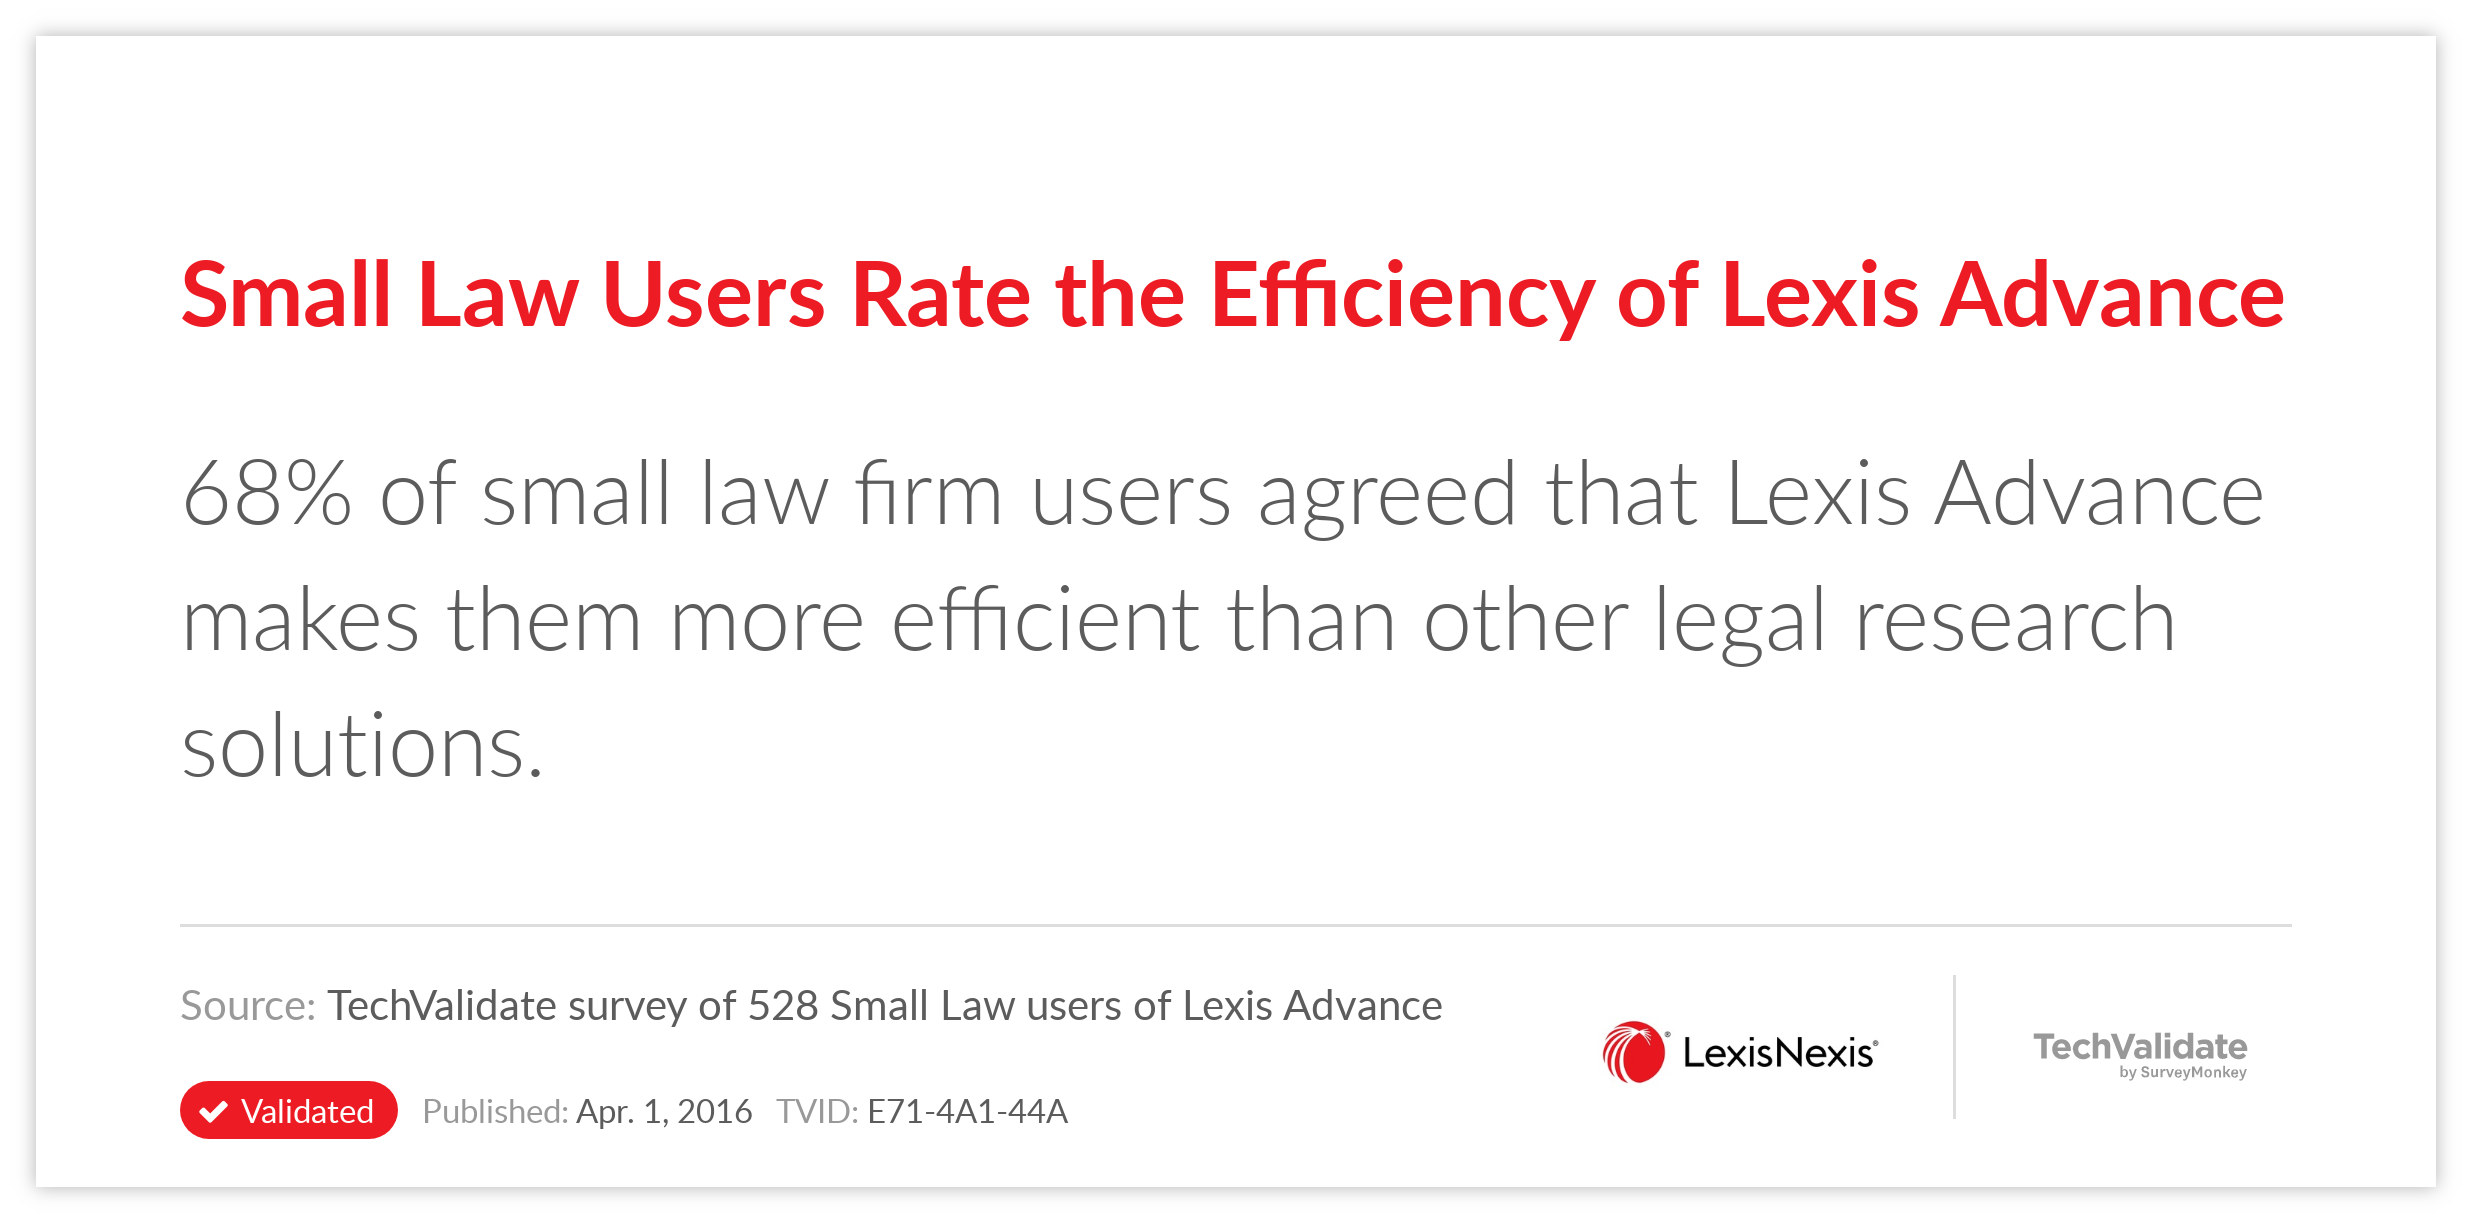 Small Law Users Rate the Efficiency of Lexis Advance